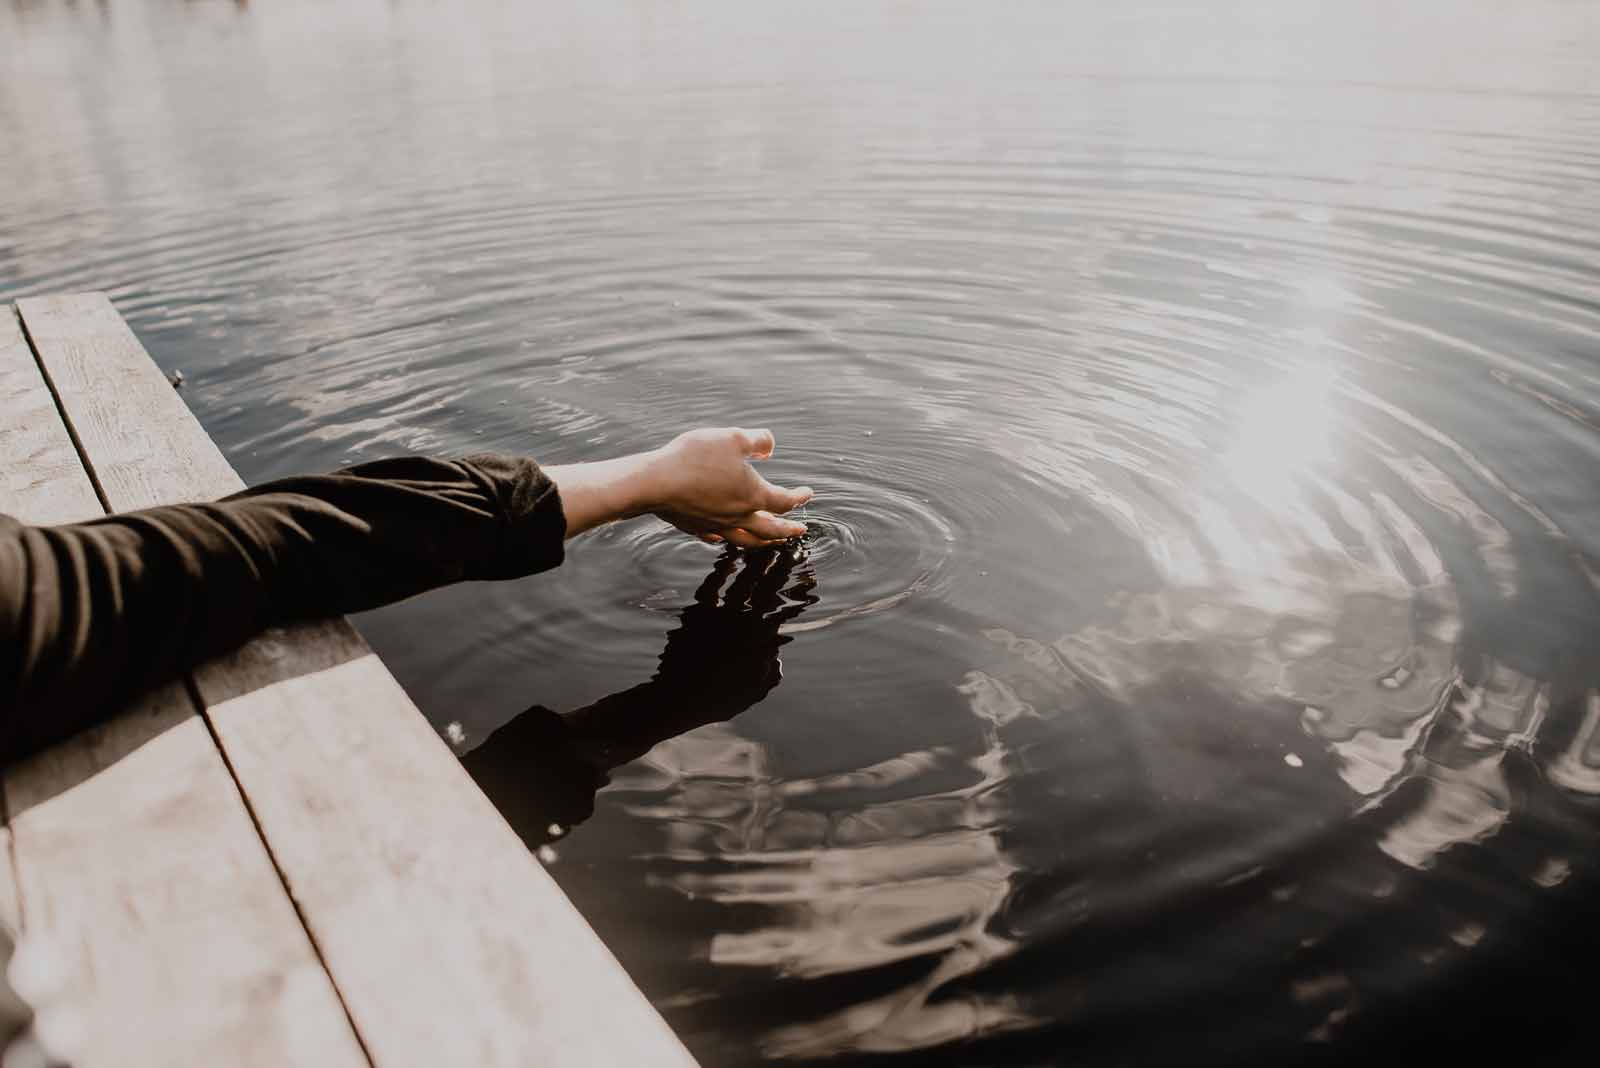 A black sleeved arm hangs into the water off of a dock. Ripples appear in the still water beneath the hand.